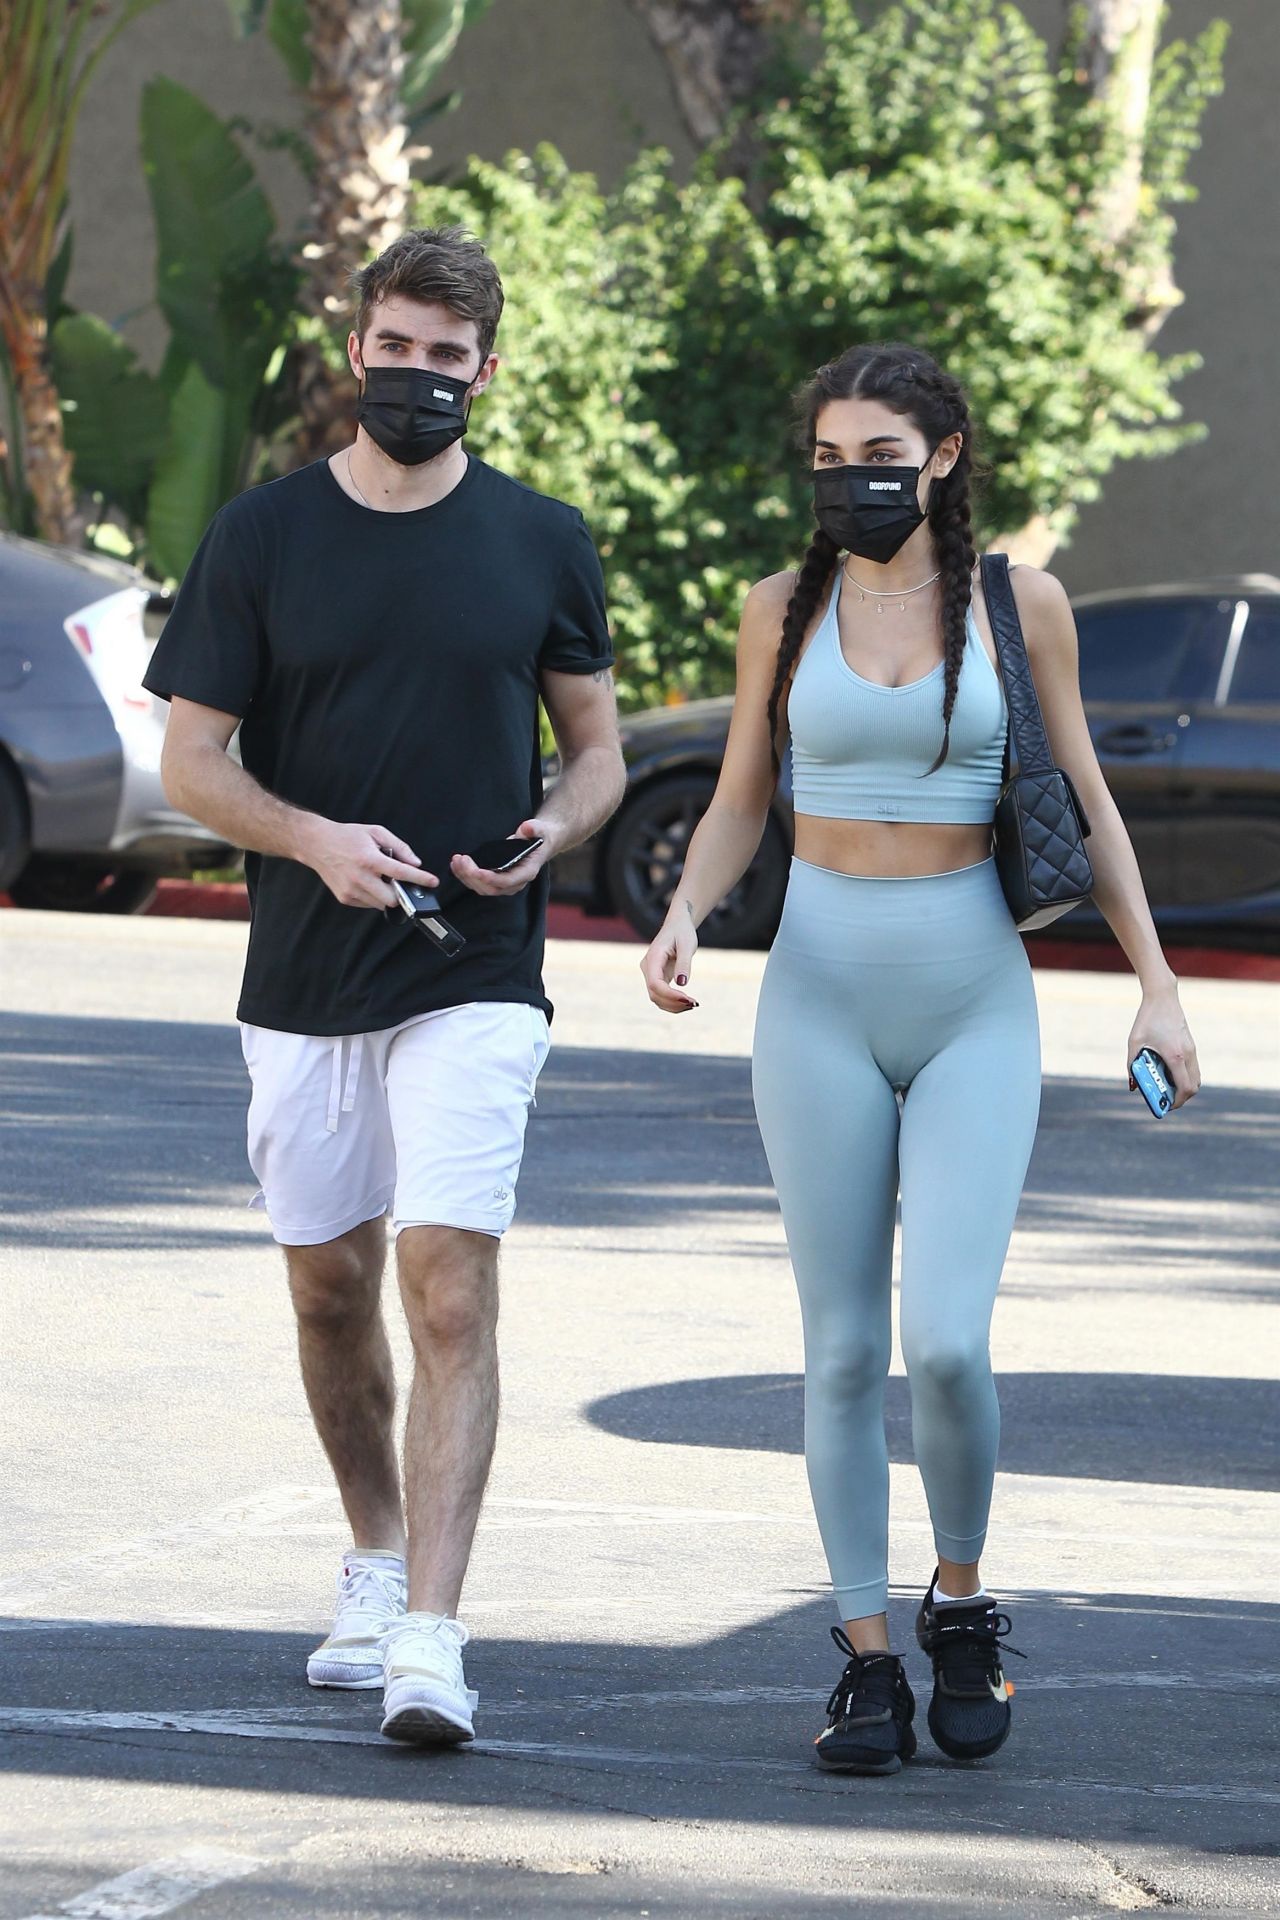 https://celebmafia.com/wp-content/uploads/2020/11/chantel-jeffries-and-andrew-taggart-out-in-la-11-18-2020-1.jpg